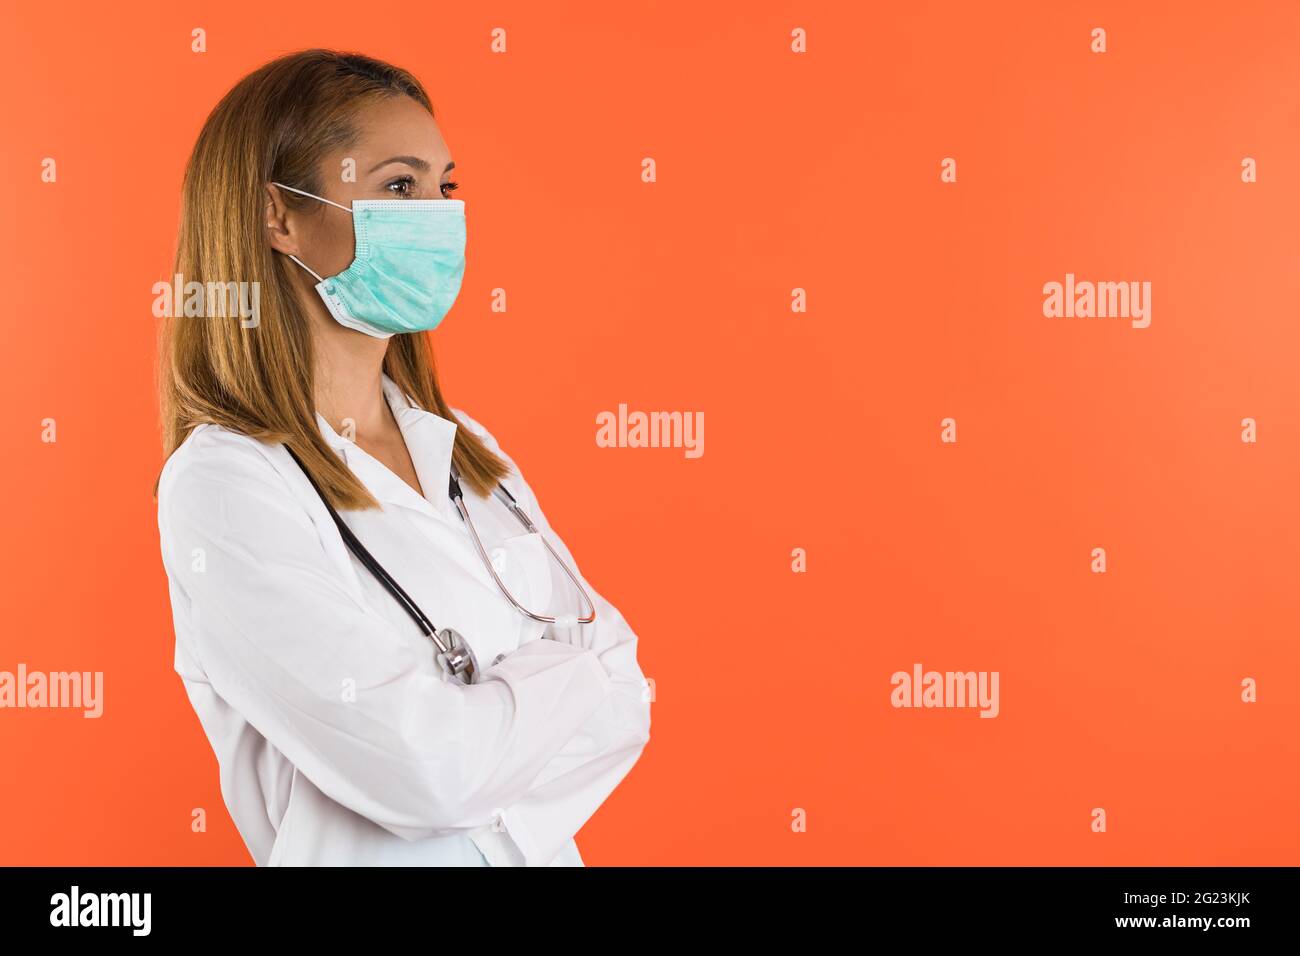 Female doctor or nurse with face mask poses in profile, wearing white coat Stock Photo